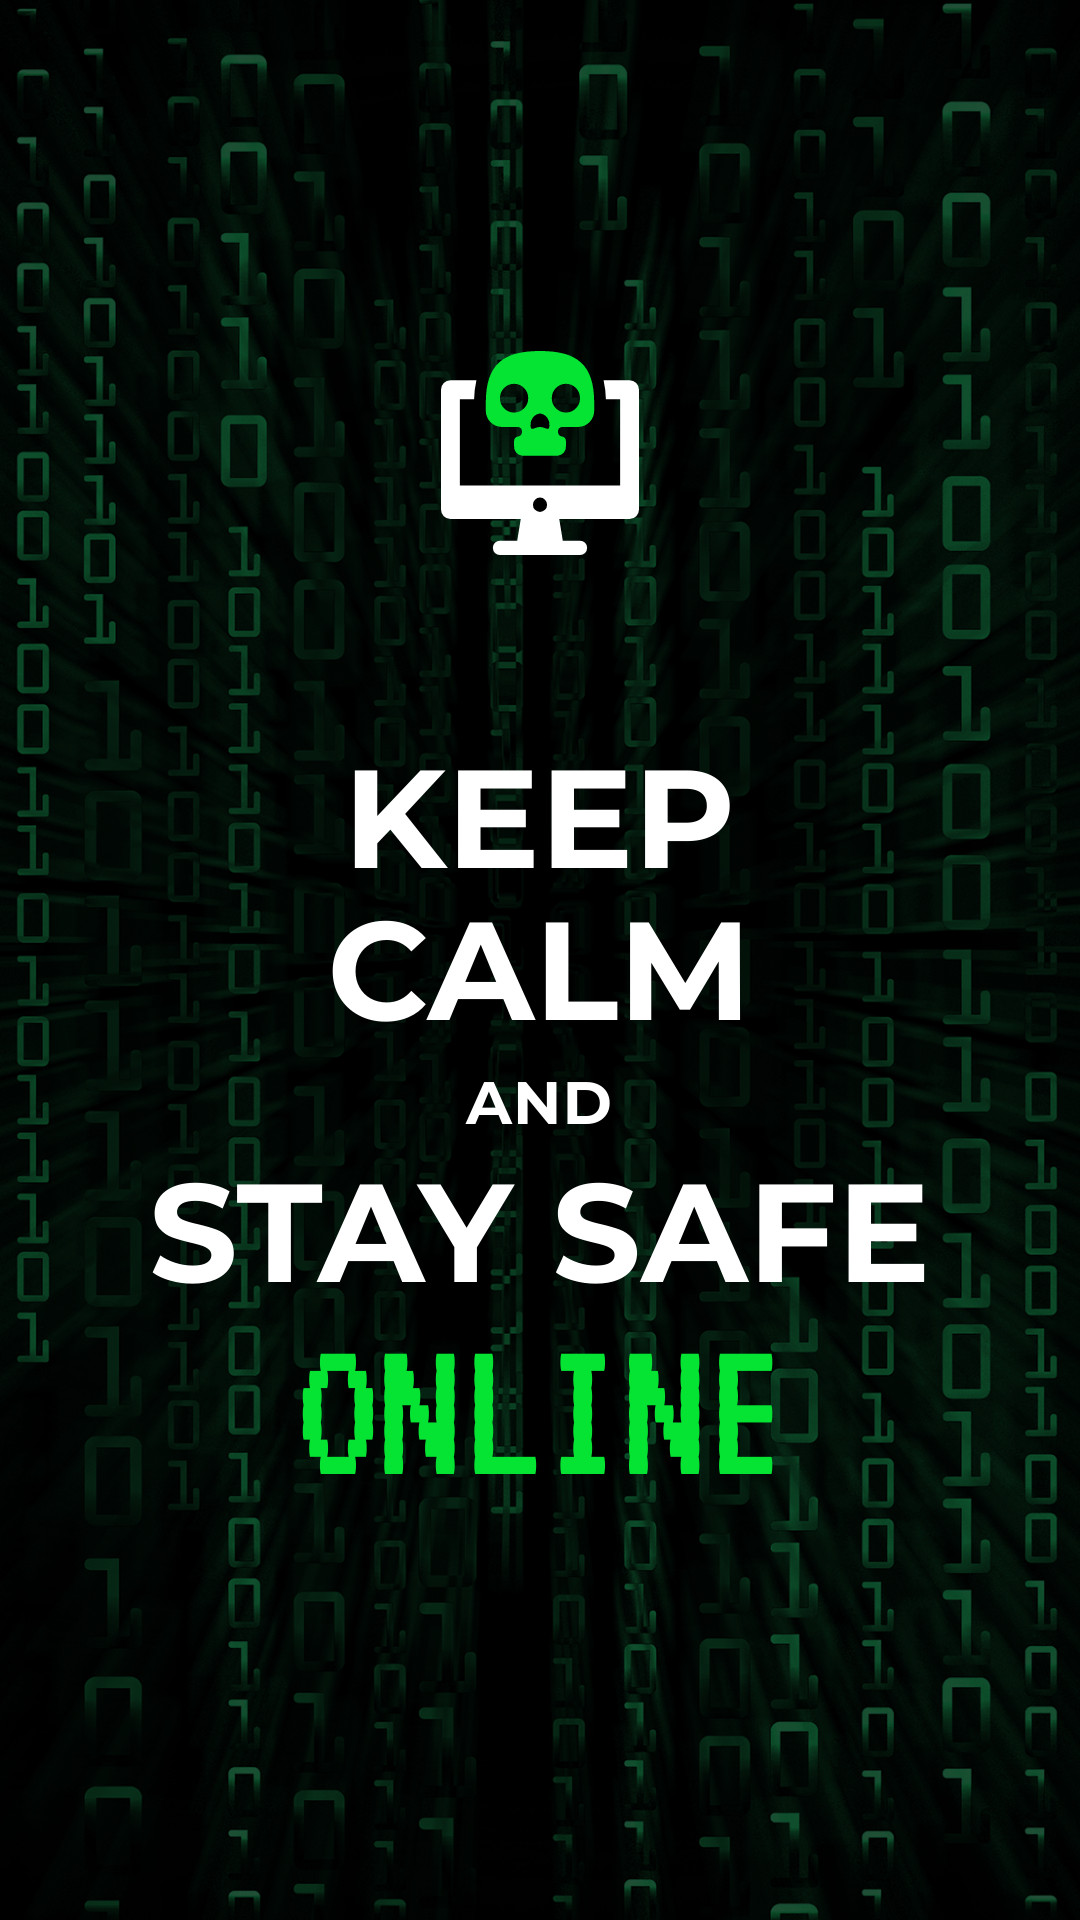 Keep Calm and Stay Safe Online Facebook Sponsored Message 1200x628